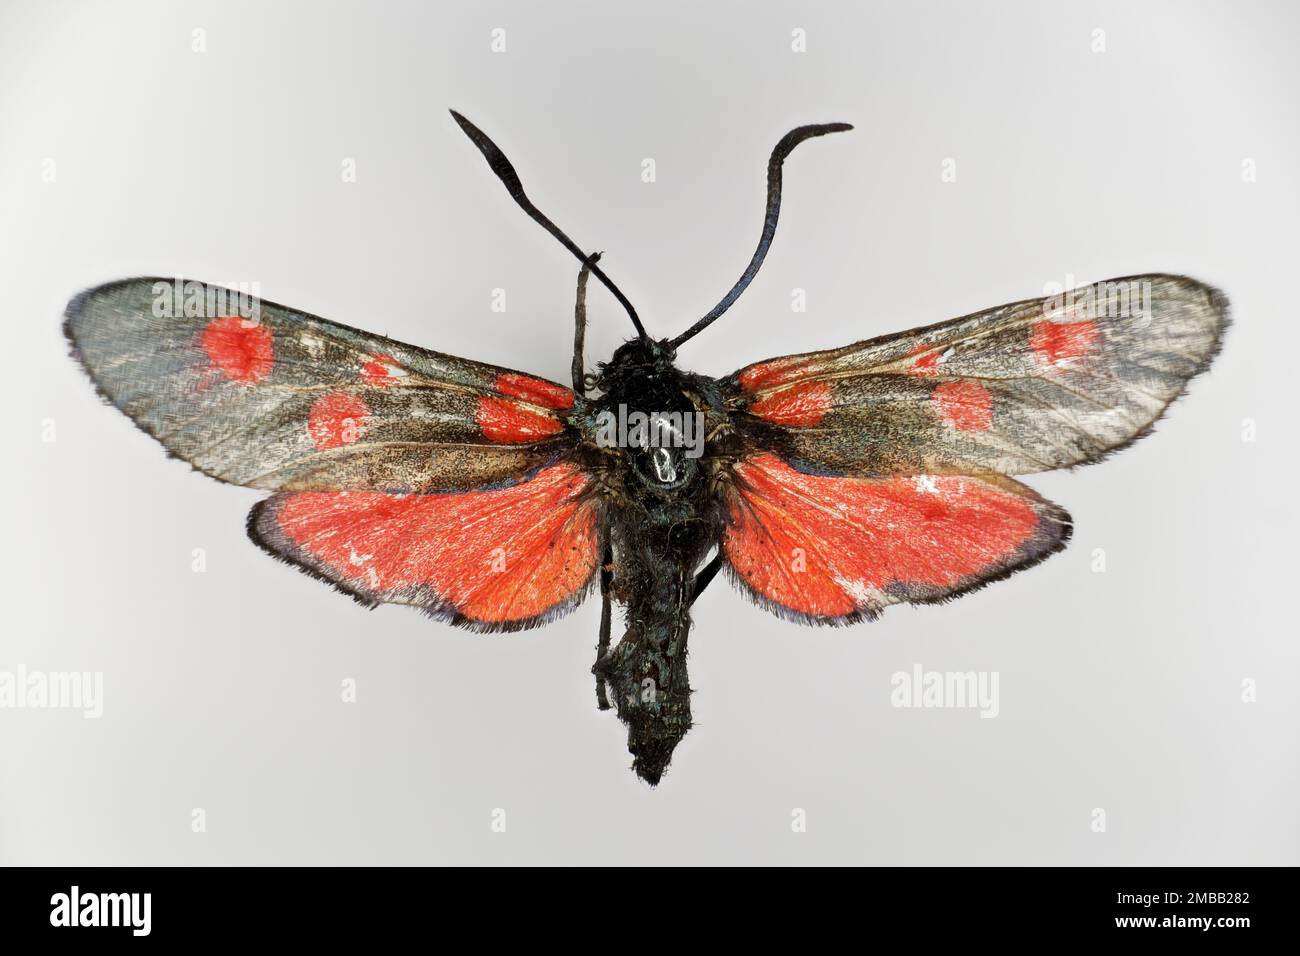 Narrow-bordered five-spot burnet, Zygaena lonicerae (family Zygaenidae), a butterfly, 50 years old specimen from butterfly collection. Stock Photo